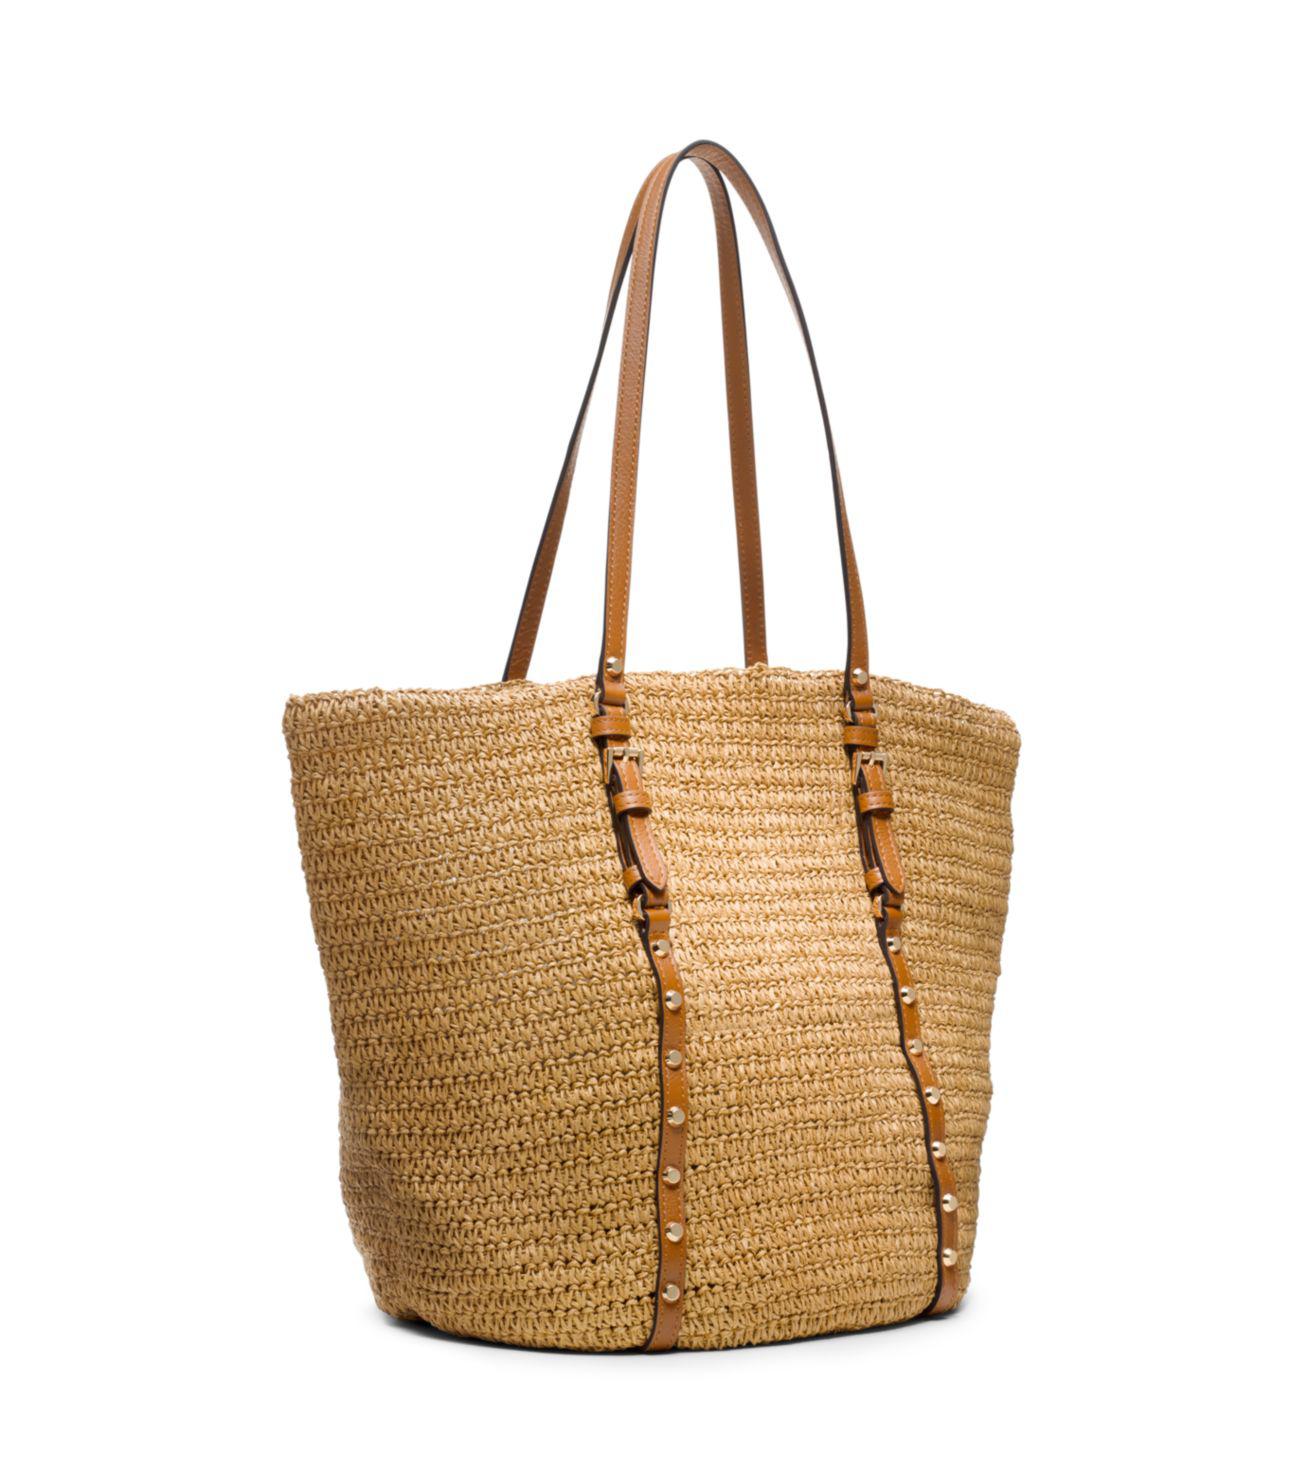 Michael Kors Large Studded Straw Shopper Tote Bag in Natural | Lyst